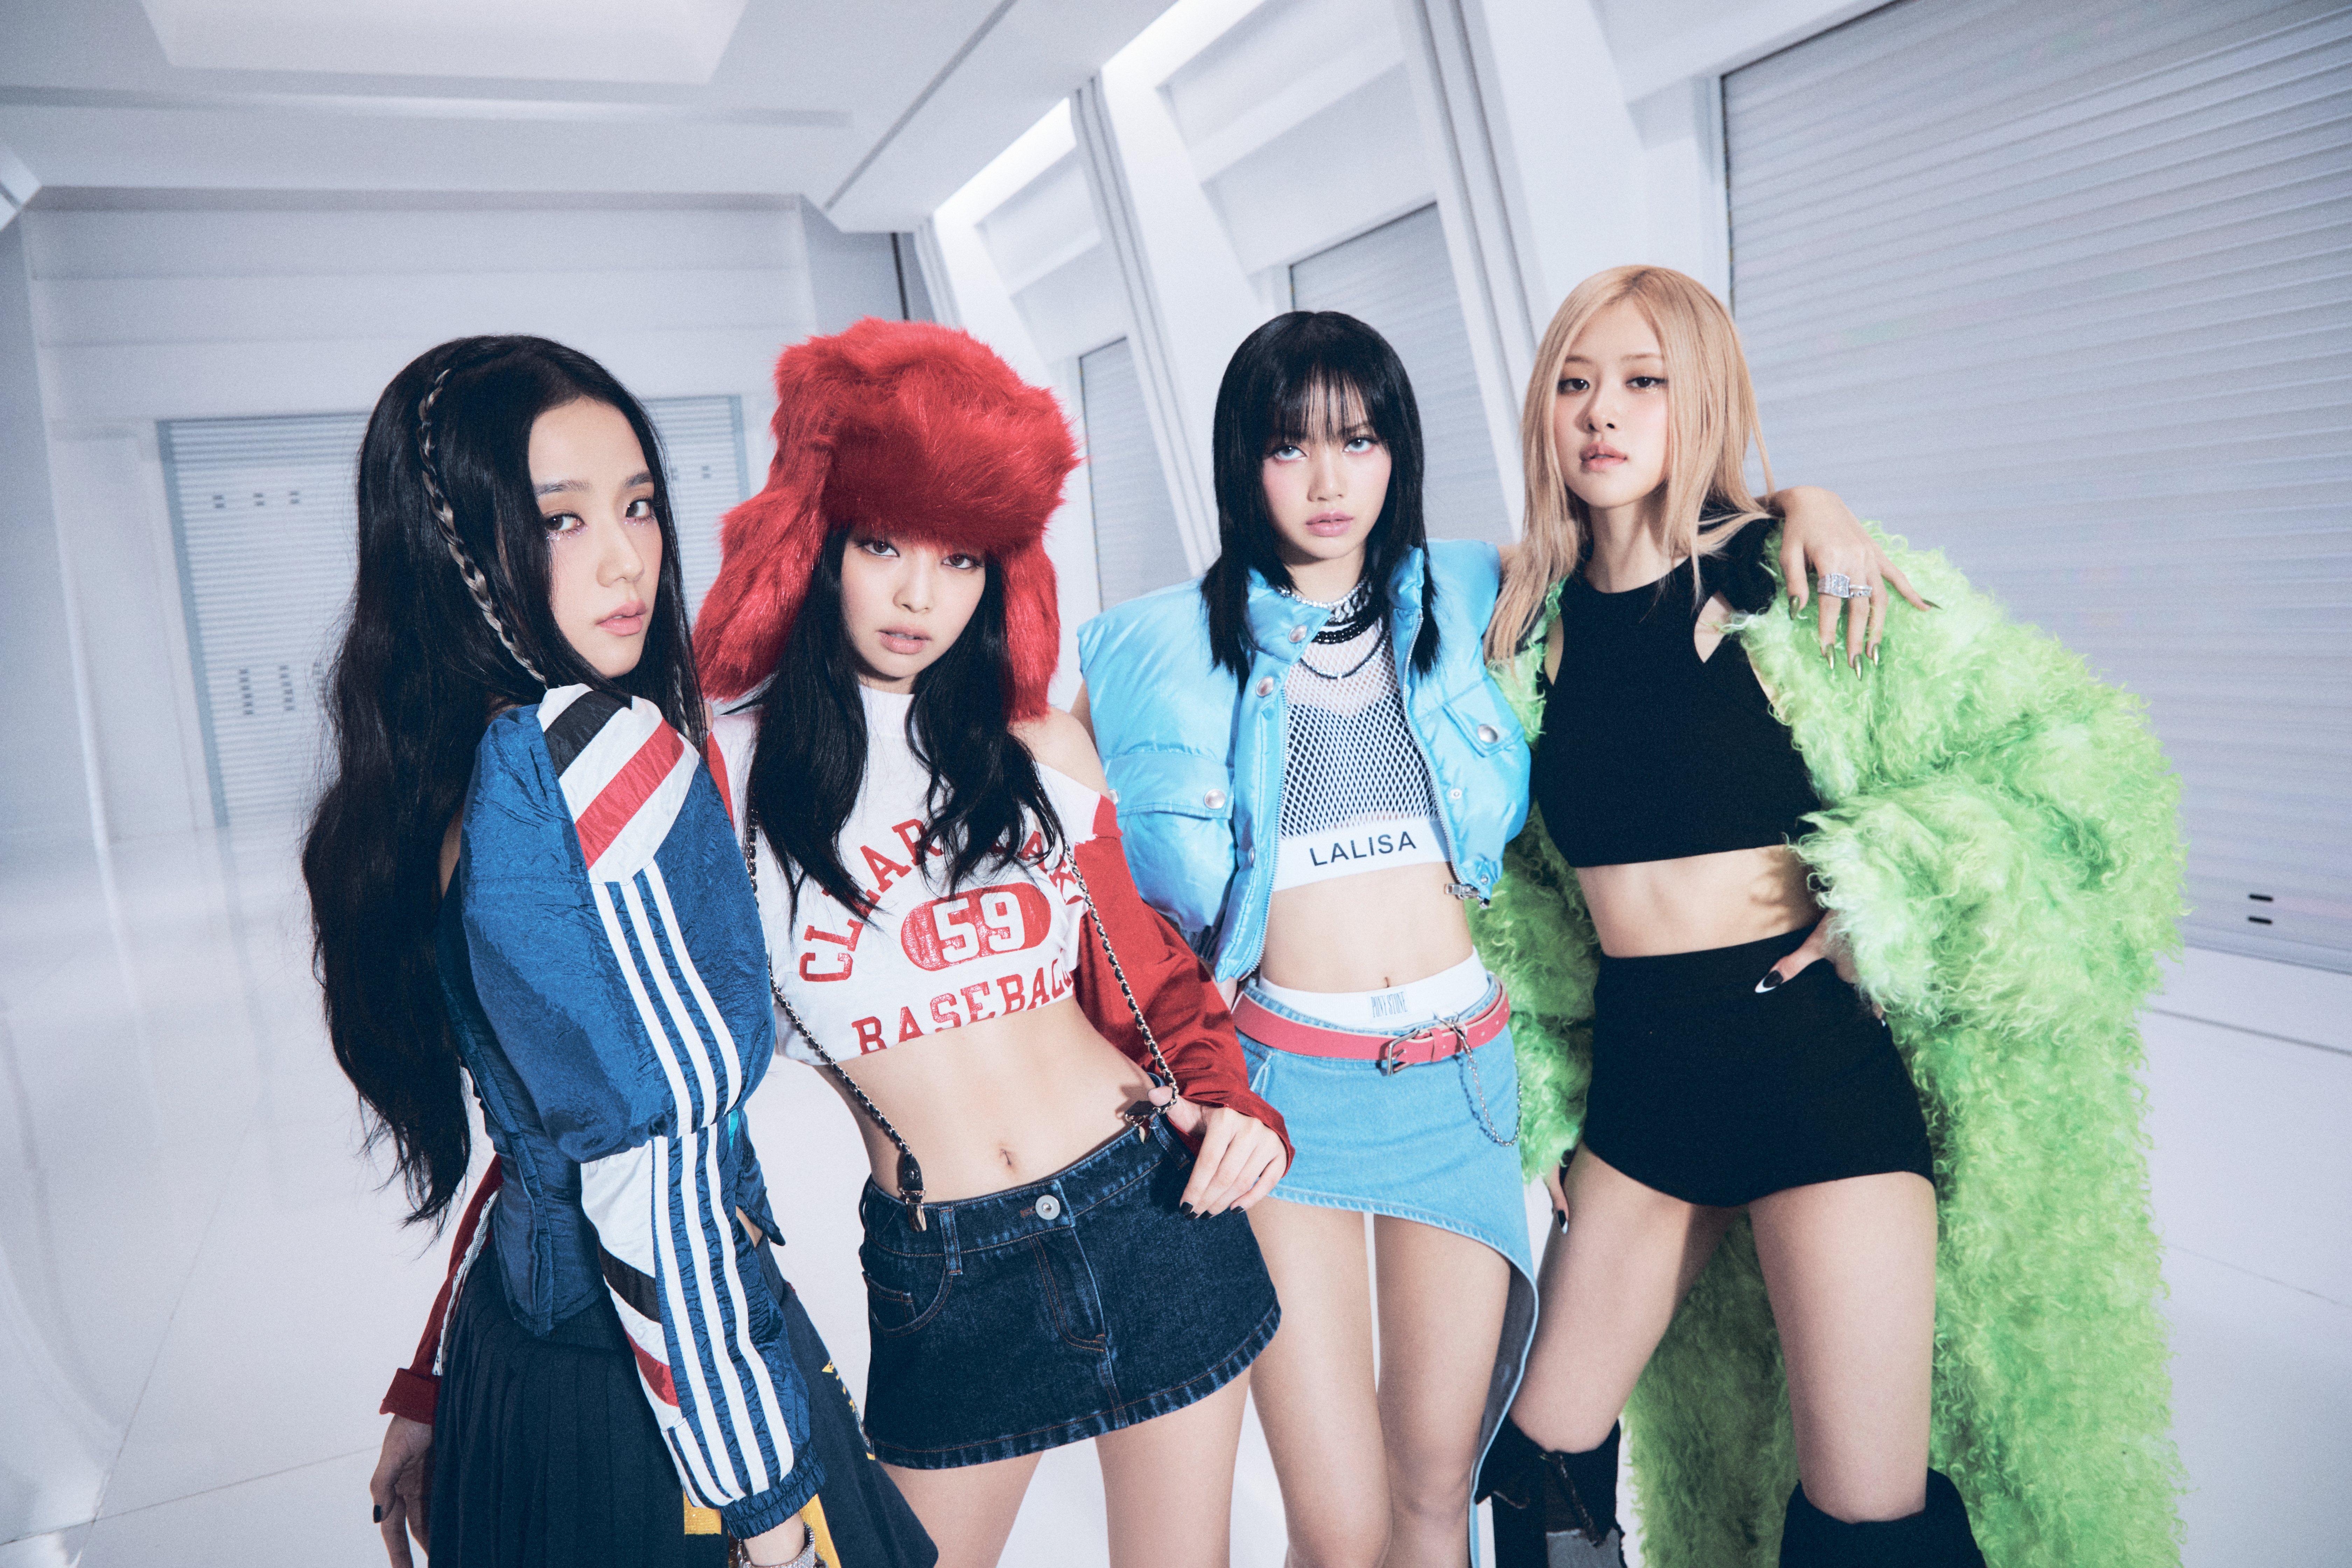 5 Takeaways From BLACKPINK's New Album, 'Born Pink': New Sounds